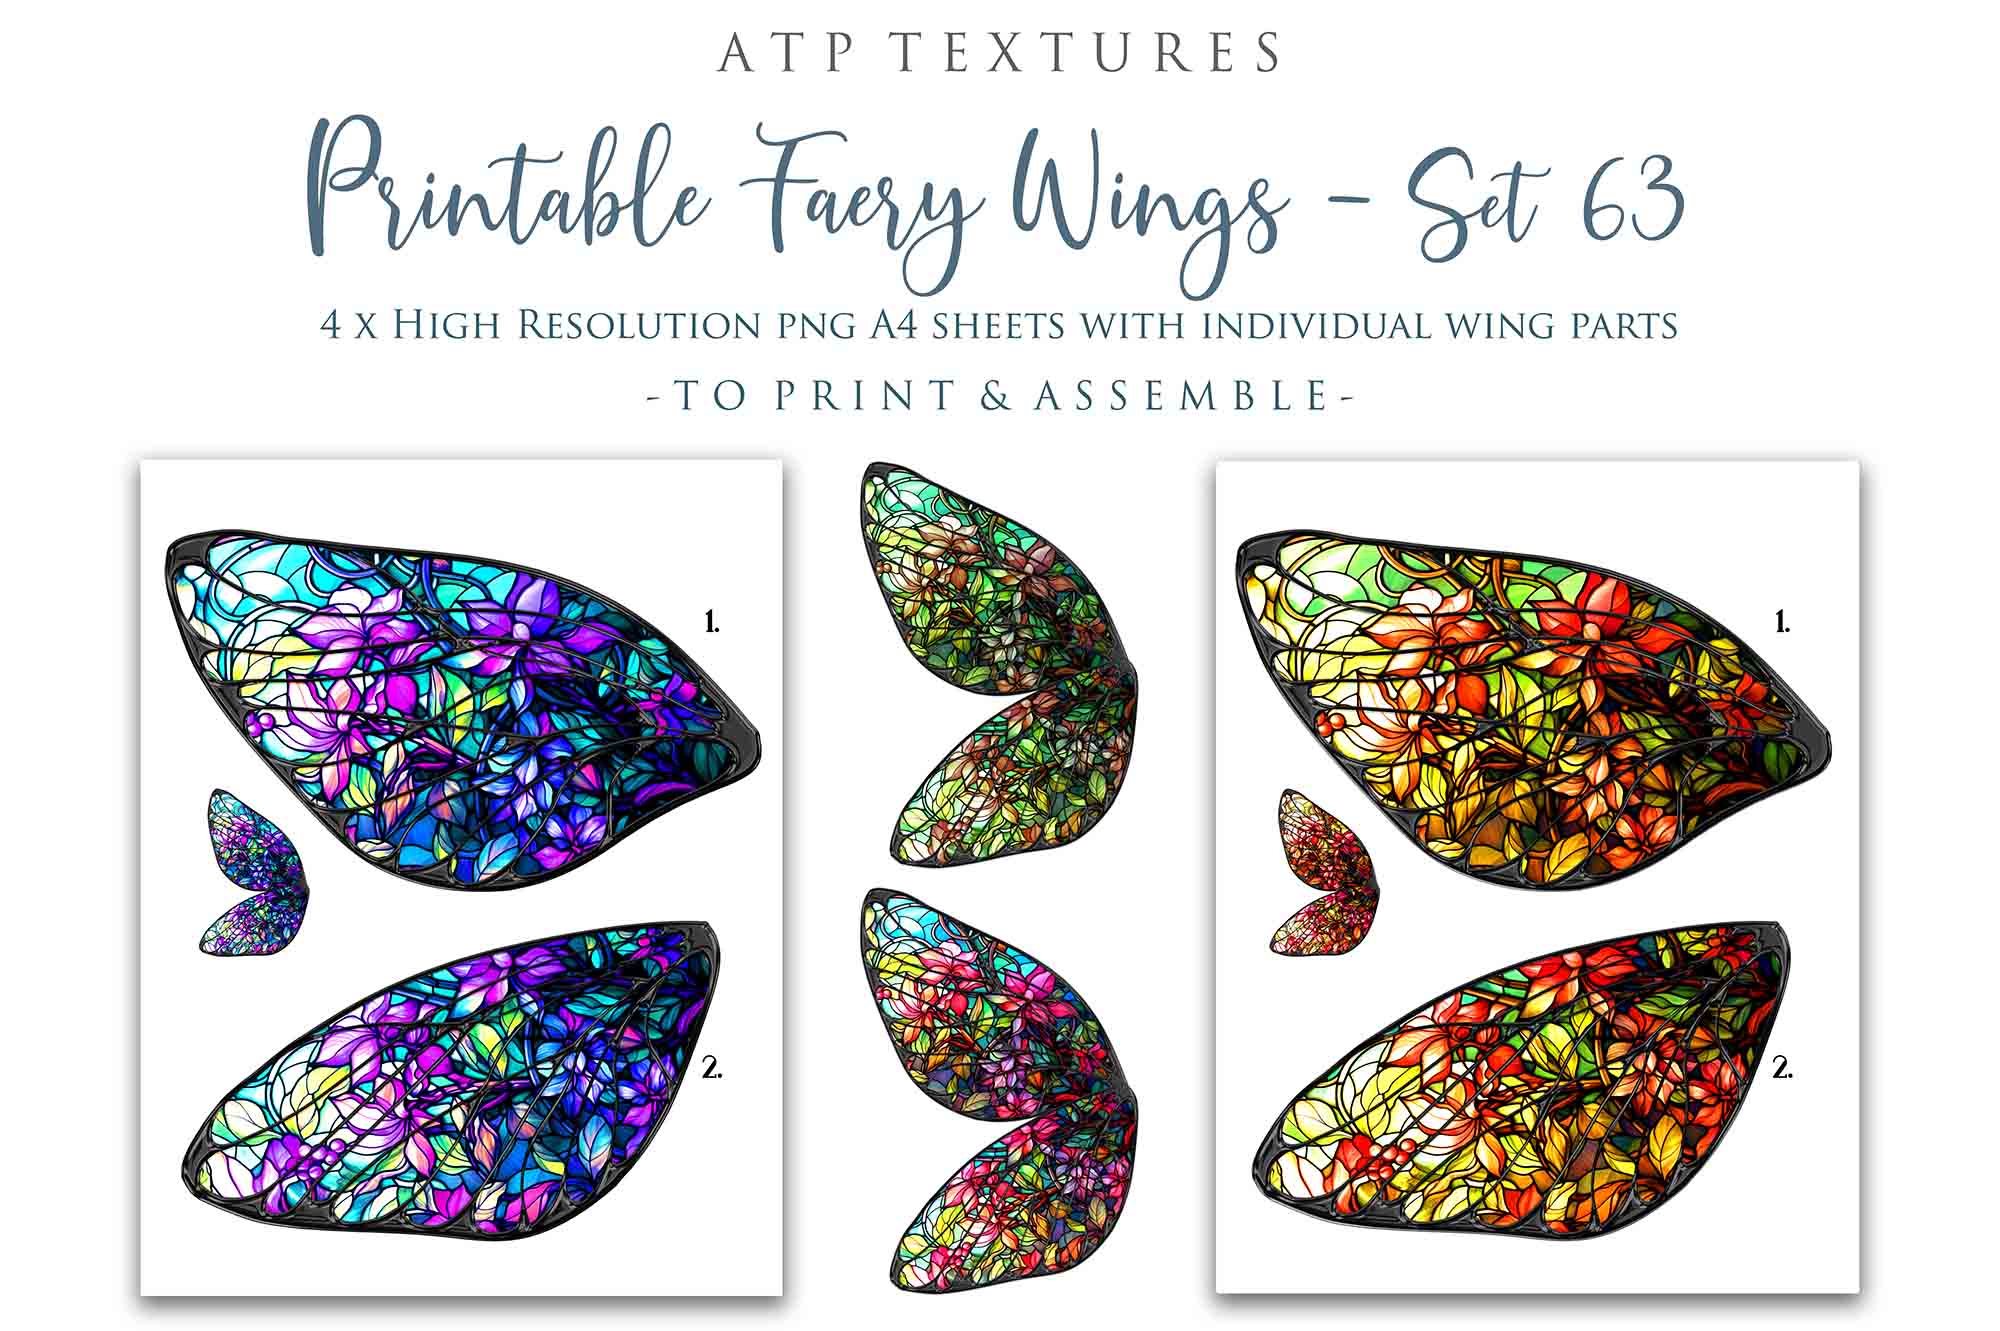 Printable Wings template. For Adult sized wings, child wings, Art dolls. Fairy wings for cosplay. Faerie fantasy, festival, halloween, Costume. Print and assemble. Pattern for making fairy wings.  High resolution Files. Png Overlays. Stained Glass. Template for paper craft. Diy Wings. Make your own.